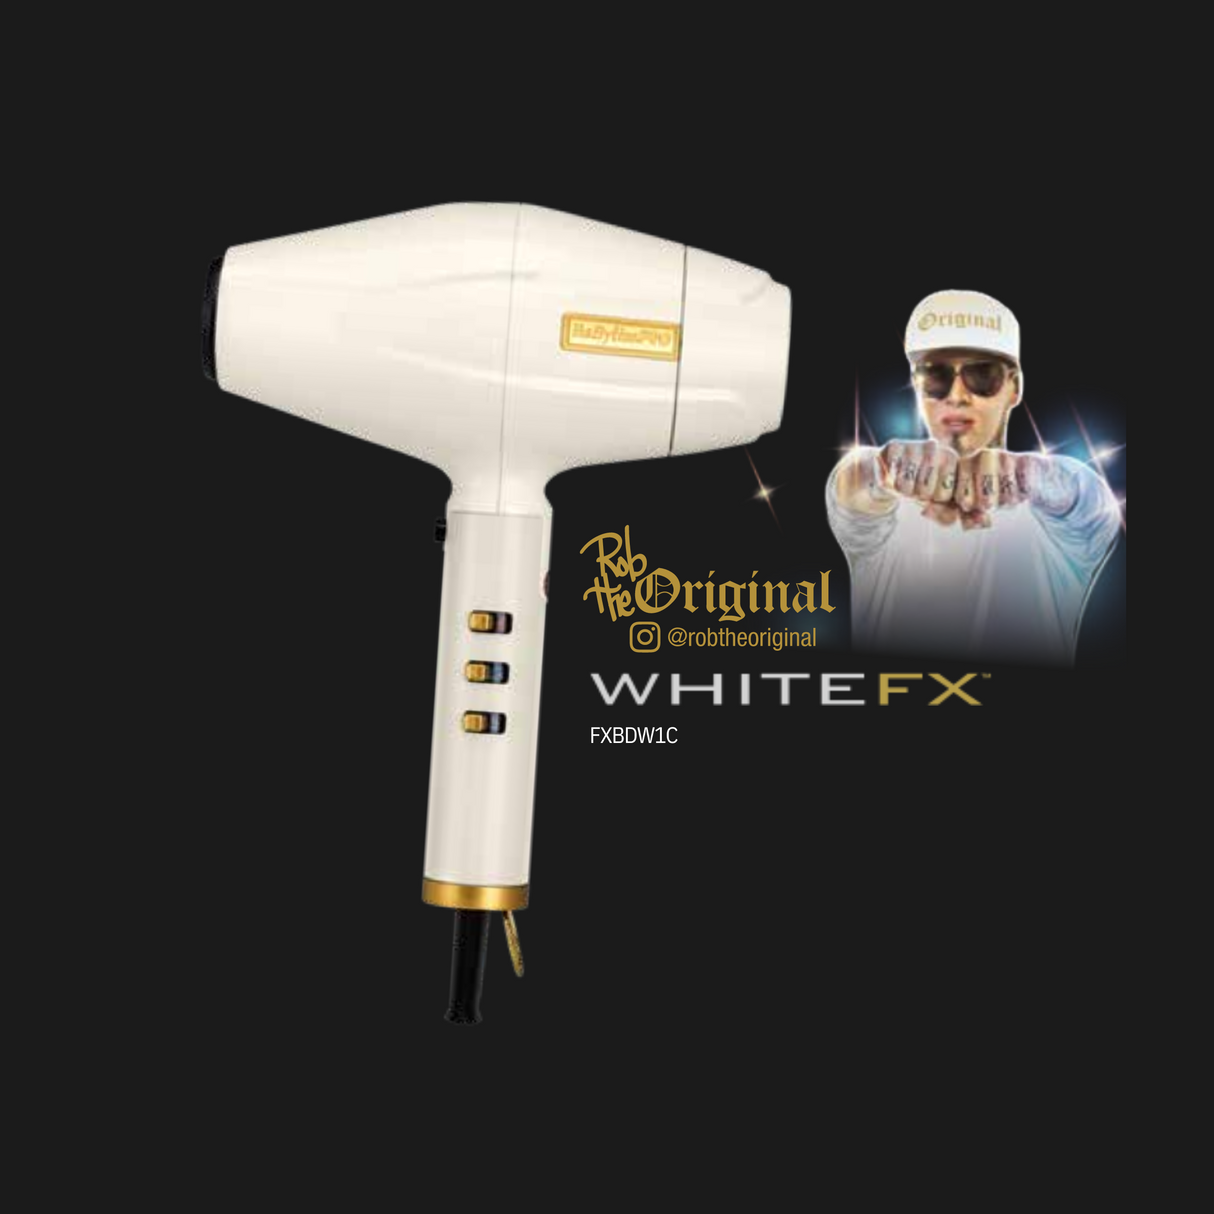 BabylissPro WhiteFX Limited Edition Turbo Hair Dryer